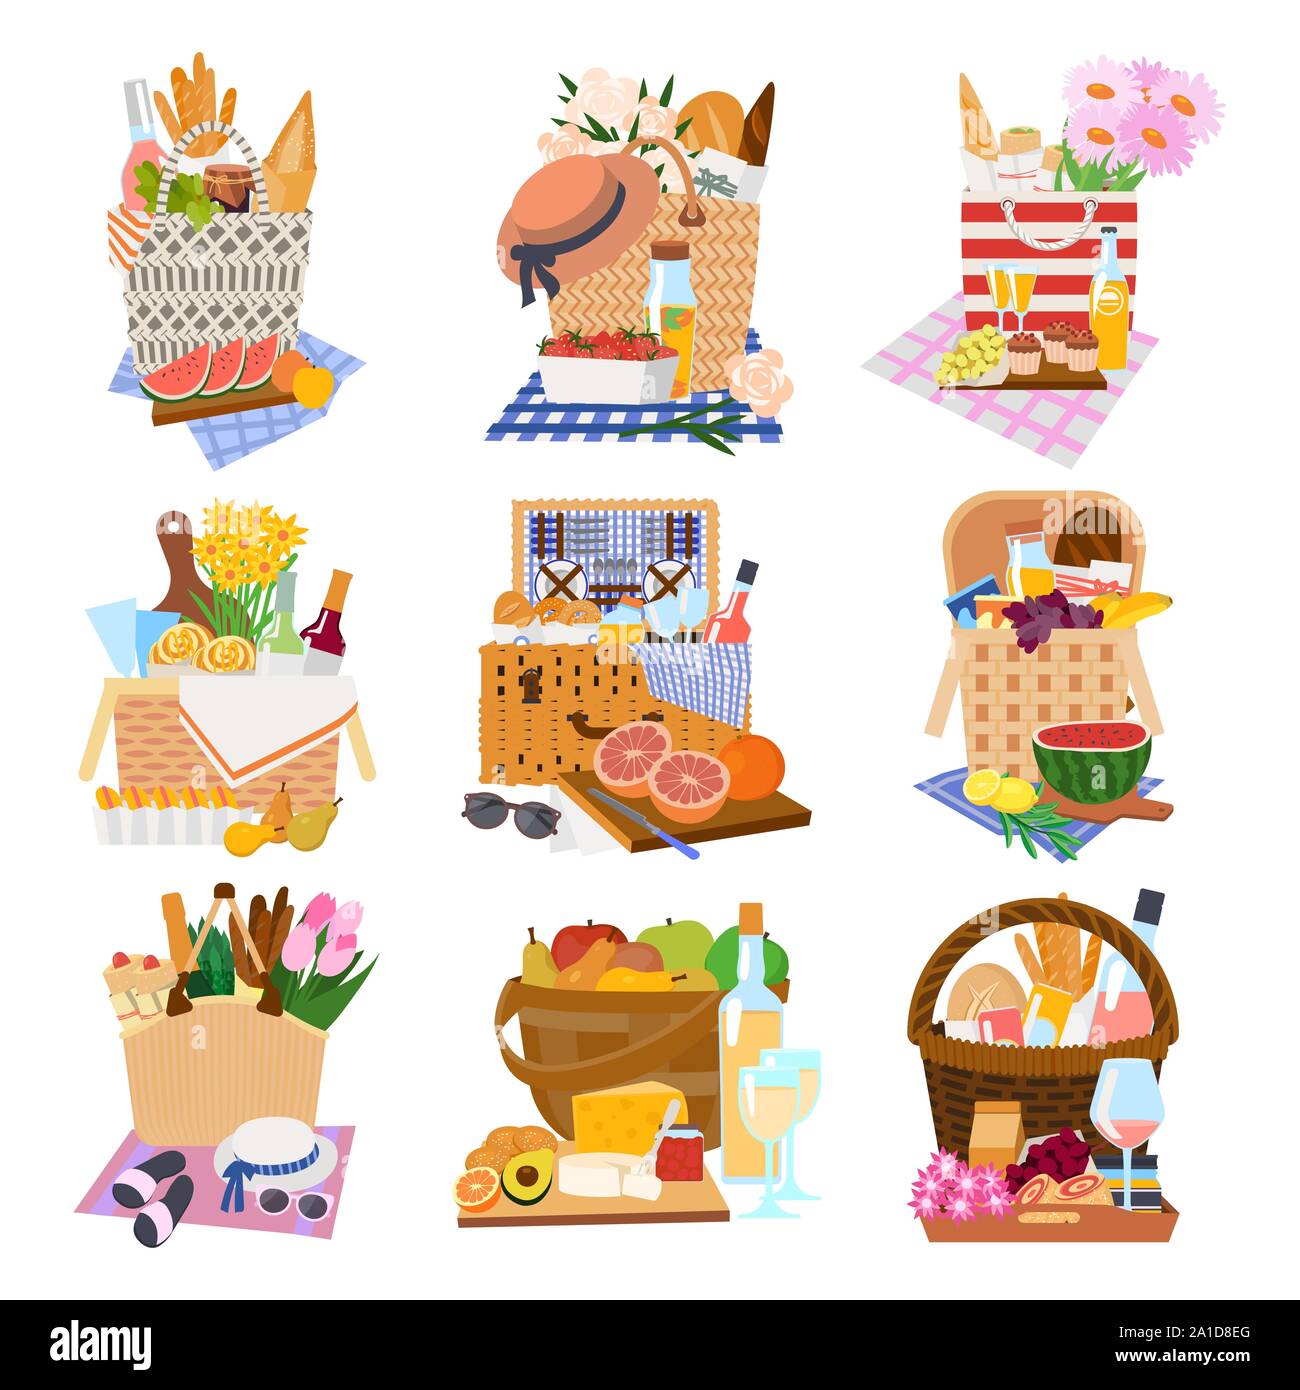 Gift or picnic, holiday baskets on tablecloth. Stock Vector